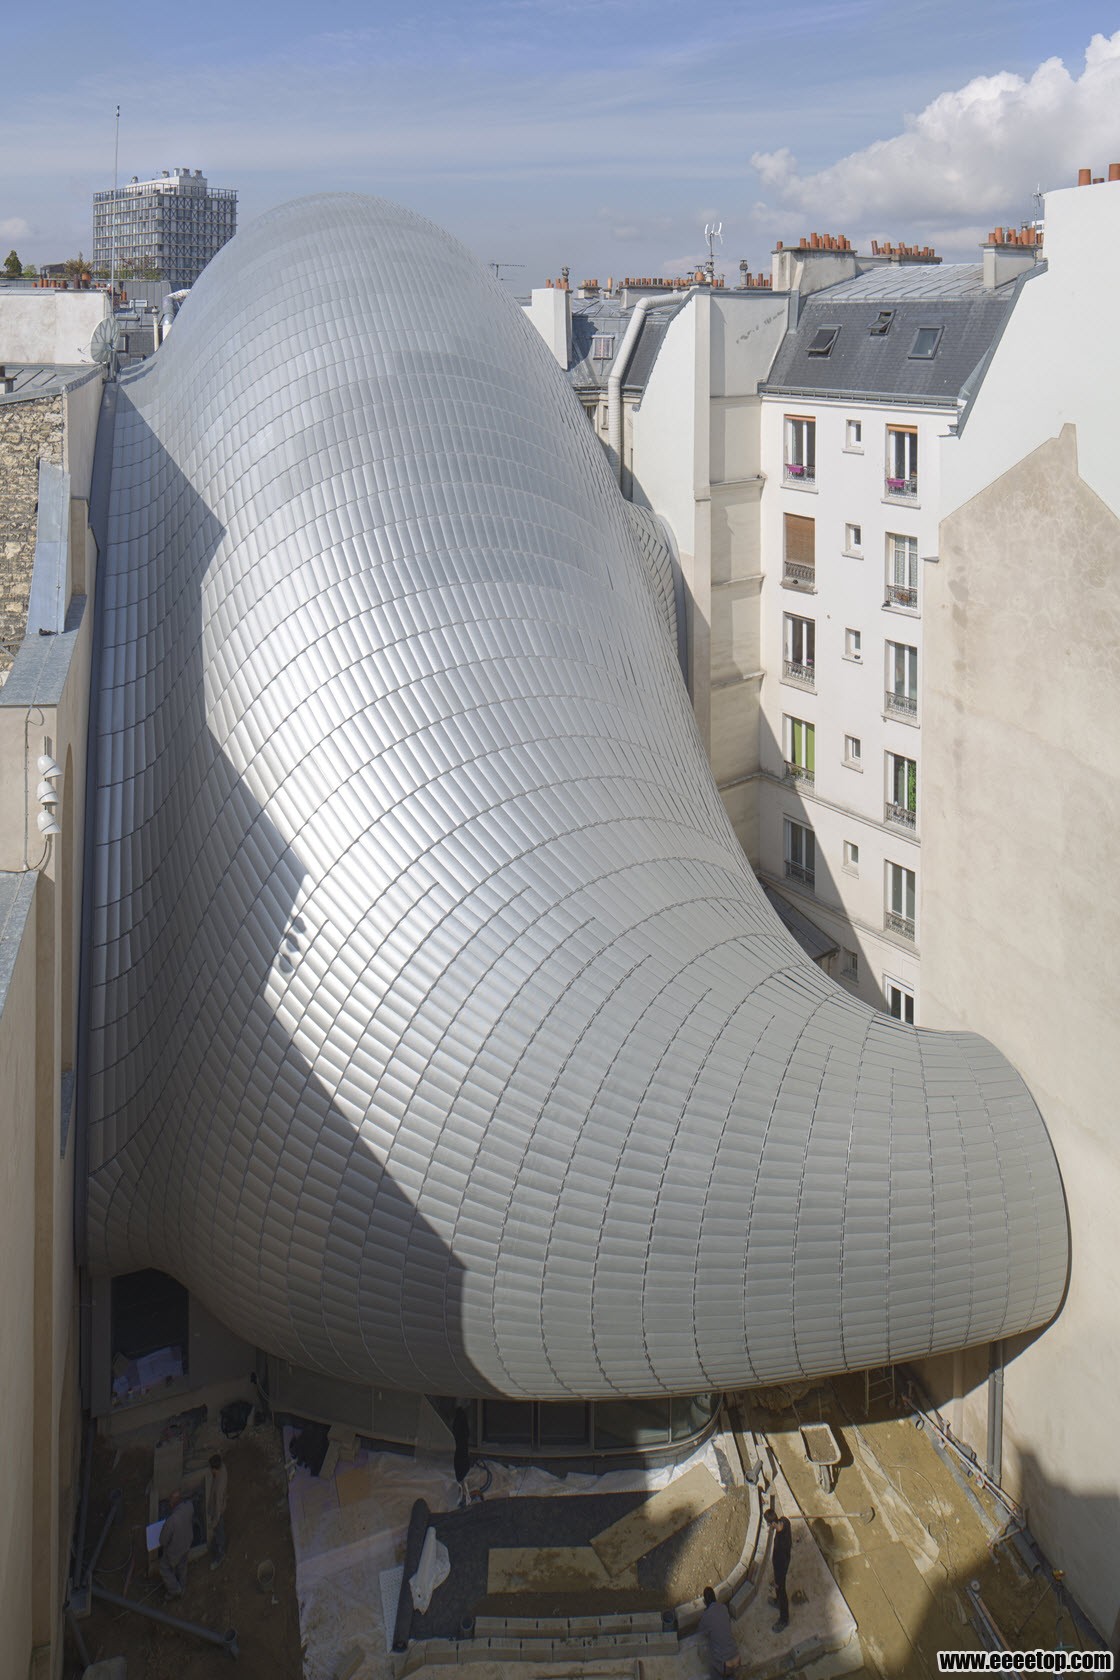 Eؽ_Pathe-Foundation-installation-in-Paris-by-Renzo-Piano_05.jpg